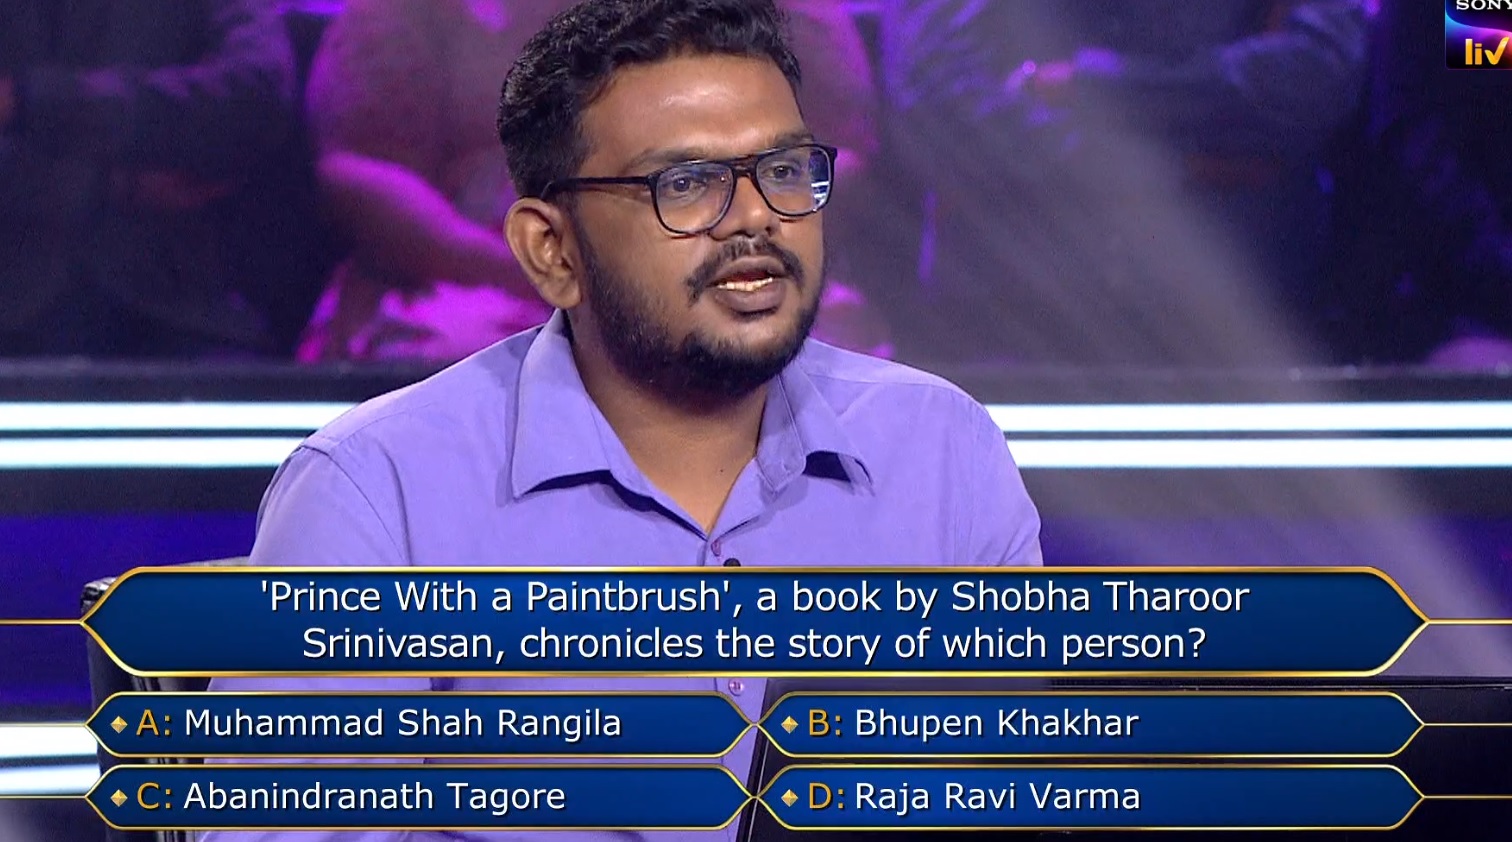 Ques : ‘Prince with a Paintbrush’, a book by Shobha Tharoor Srinivasan, Chronicles the story of which person?